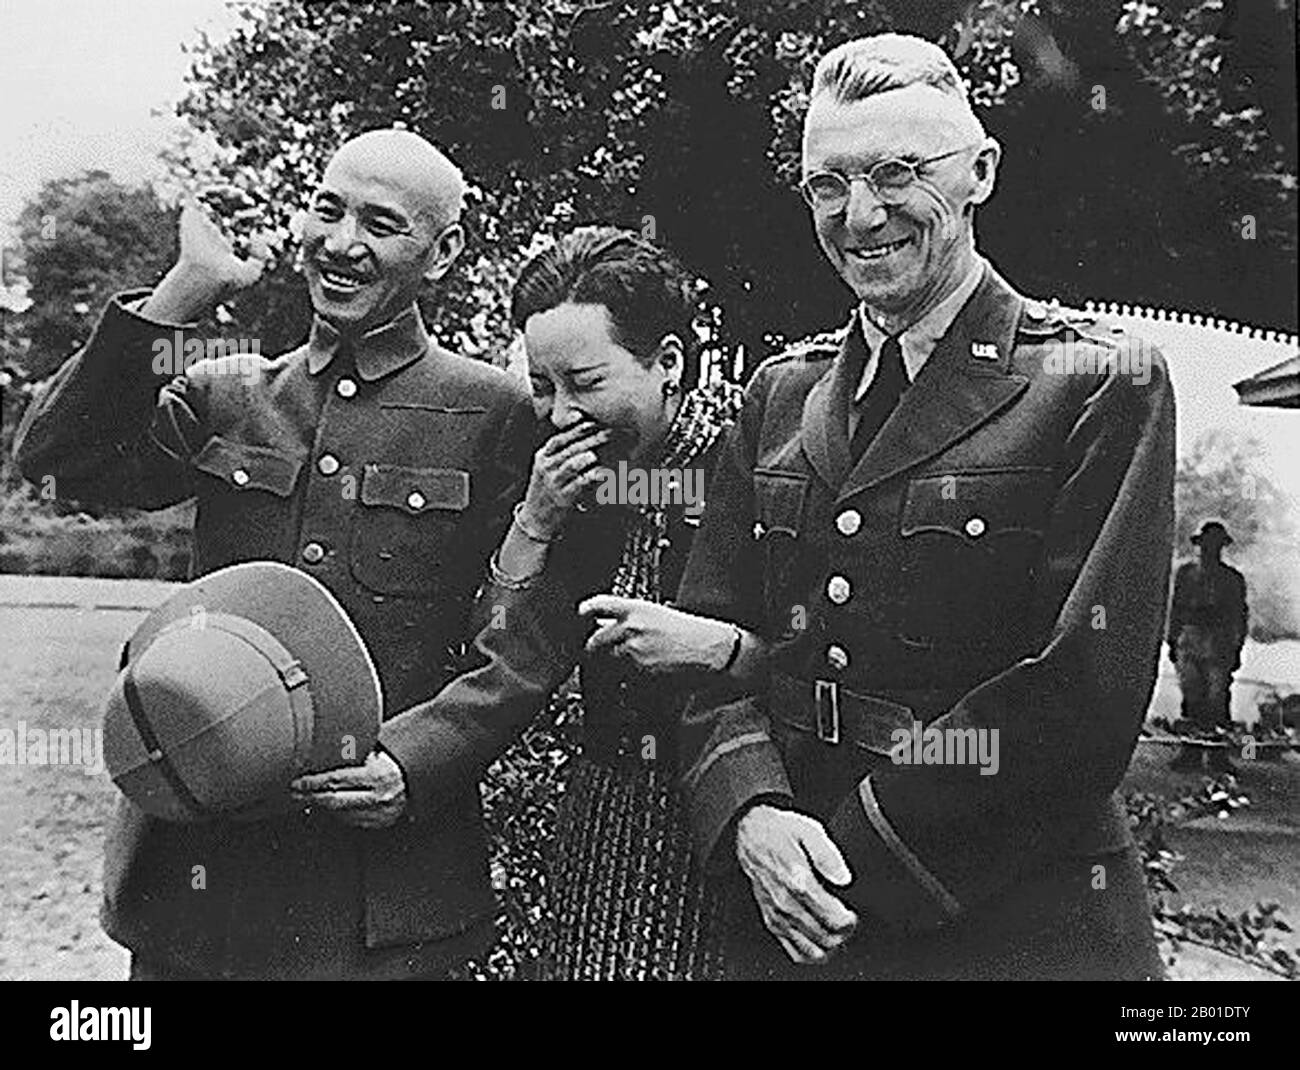 China: Left to Right: Chiang Kai Shek, Soong Mei-ling (Madame Chiang Kai-shek) and General Joseph Stilwell ('Vinegar Joe'), Kunming, c. 1942.  Chiang Kai-shek (31 October 1887 - 5 April 1975) was a political and military leader of 20th century China.  Soong May-ling or Soong Mei-ling (5 March 1898 - 23 October 2003), also known as Madame Chiang Kai-shek, was a First Lady of the Republic of China (ROC), the wife of former President Chiang Kai-shek.  Joseph Warren Stilwell (19 March 1883 - 12 October 1946) was a US Army four-star General known for service in the China Burma India Theatre. Stock Photo